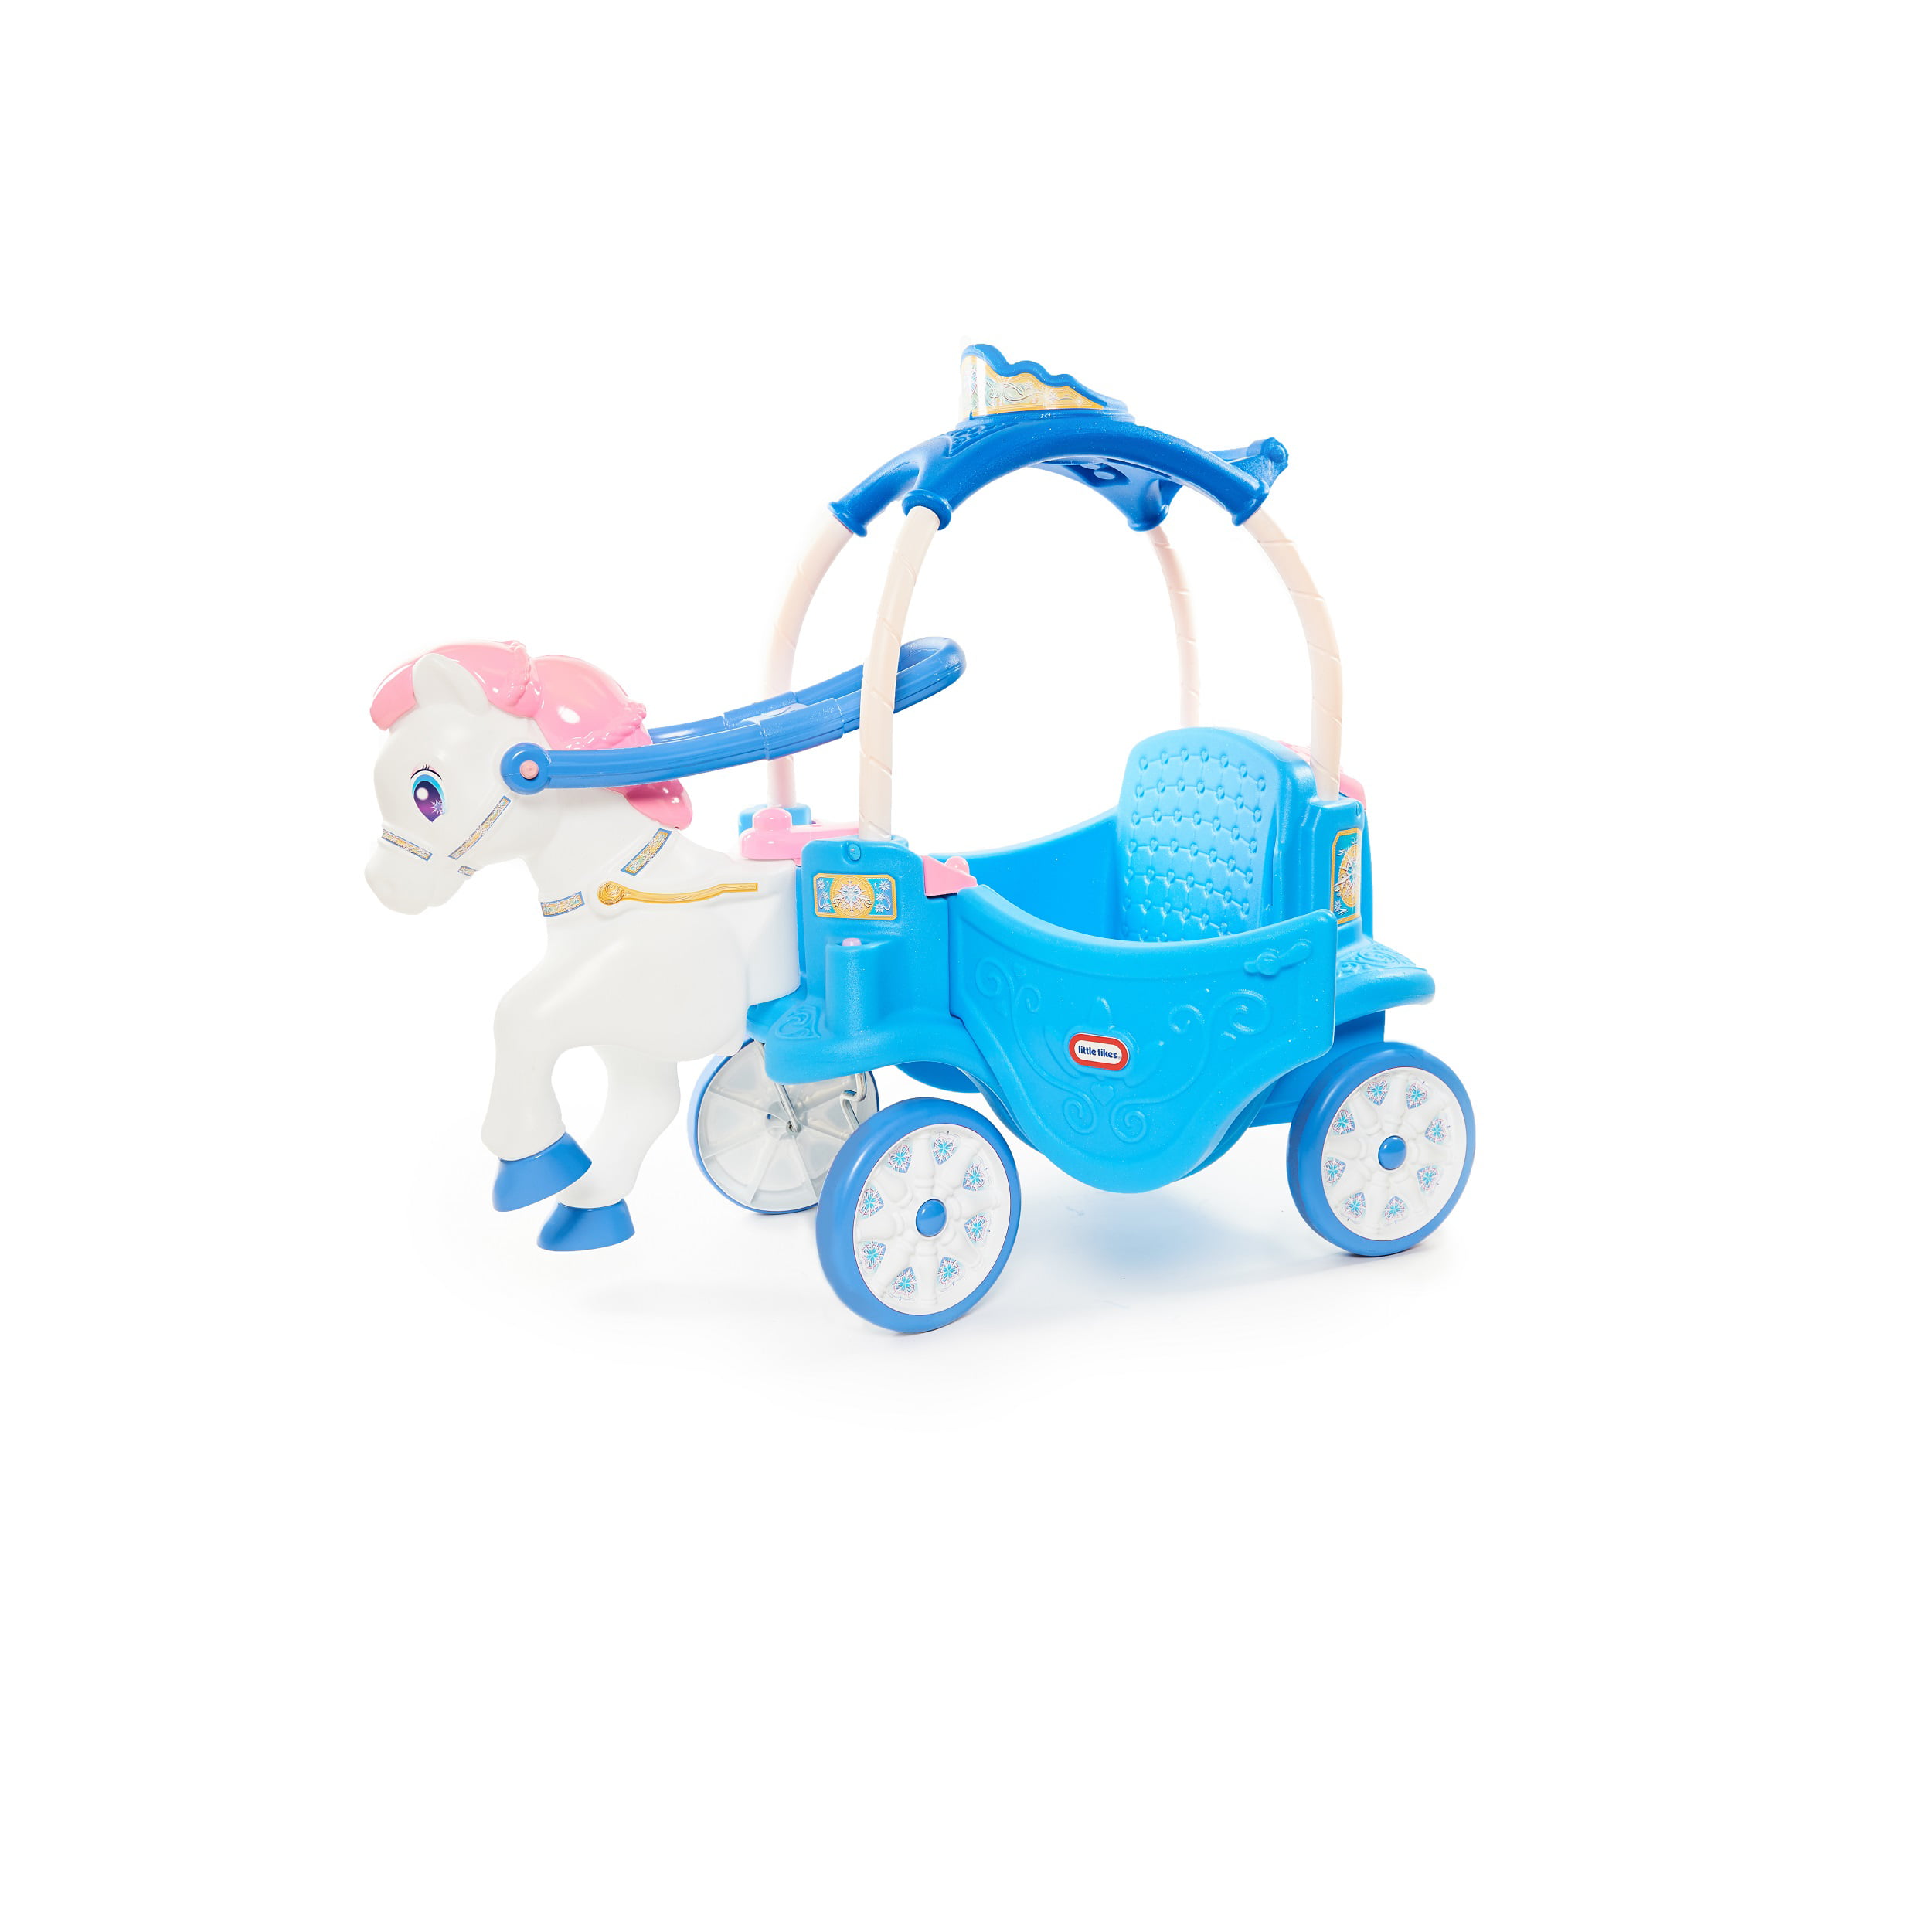 little tikes princess horse and carriage walmart